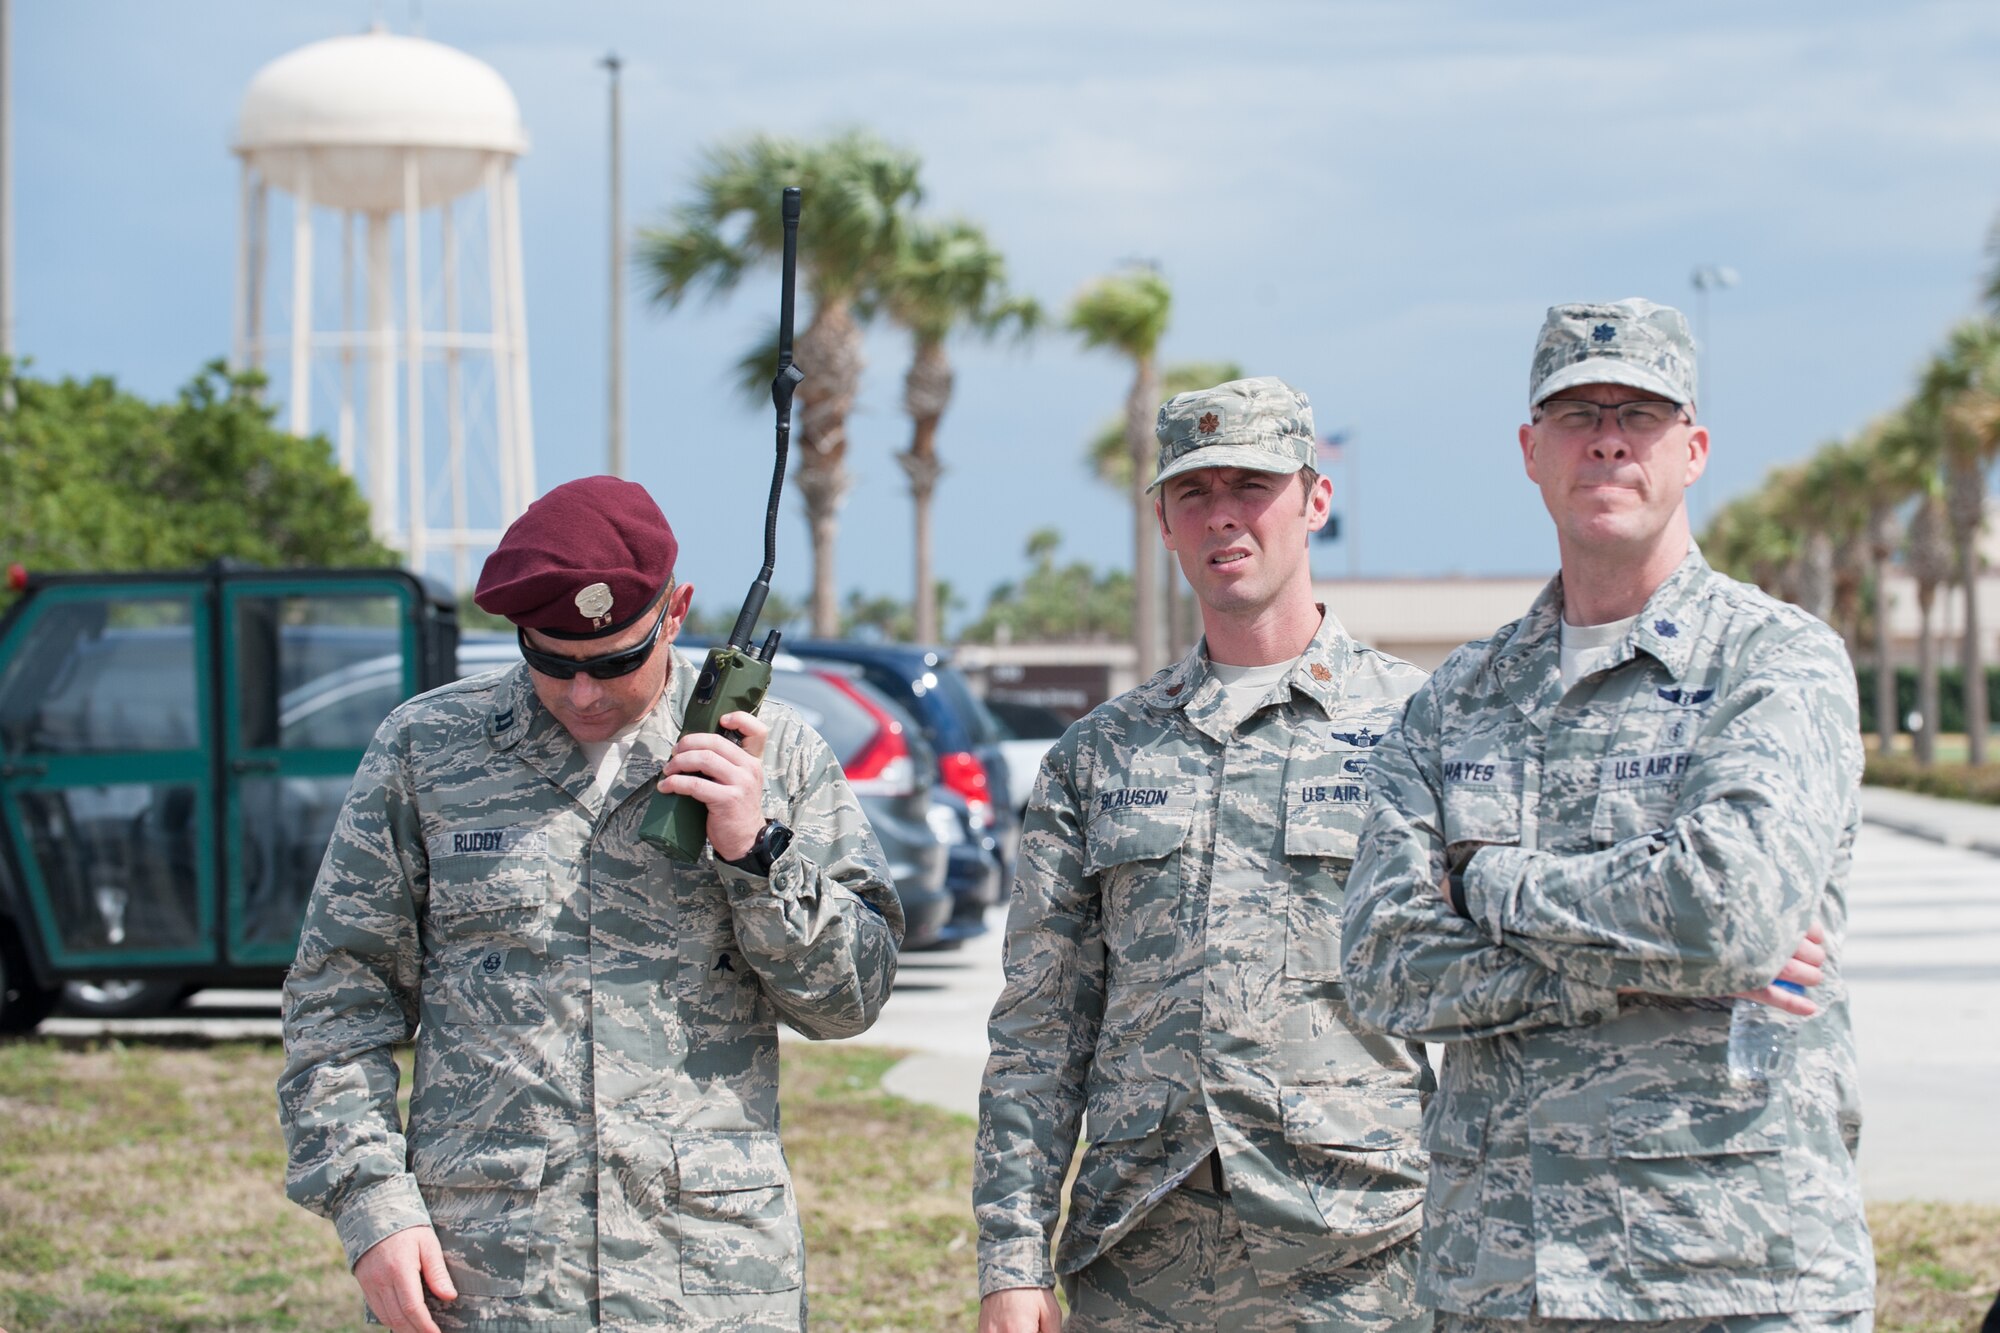 Capt. Ryan Ruddy, 308th Rescue Squadron, left, participates in an astronaut recovery demonstration with Maj. Chris Slauson and Lt. Col. Marshall Hayes, both of the 45th Operations Group's Detachment 3 at Patrick Air Force Base, Fla., March 14, 2016. The demonstration involved Air Force Guardian Angel Airmen and aircraft from the 920th Rescue Wing to showcase aspects of safe rescue operations.
Airmen from Detachment 3 coordinate astronaut capsule rescue and recovery and train personnel worldwide to ensure the Department of Defense is ready to support NASA's human space endeavors. (U.S. Air Force photo by Benjamin Thacker/Released)
